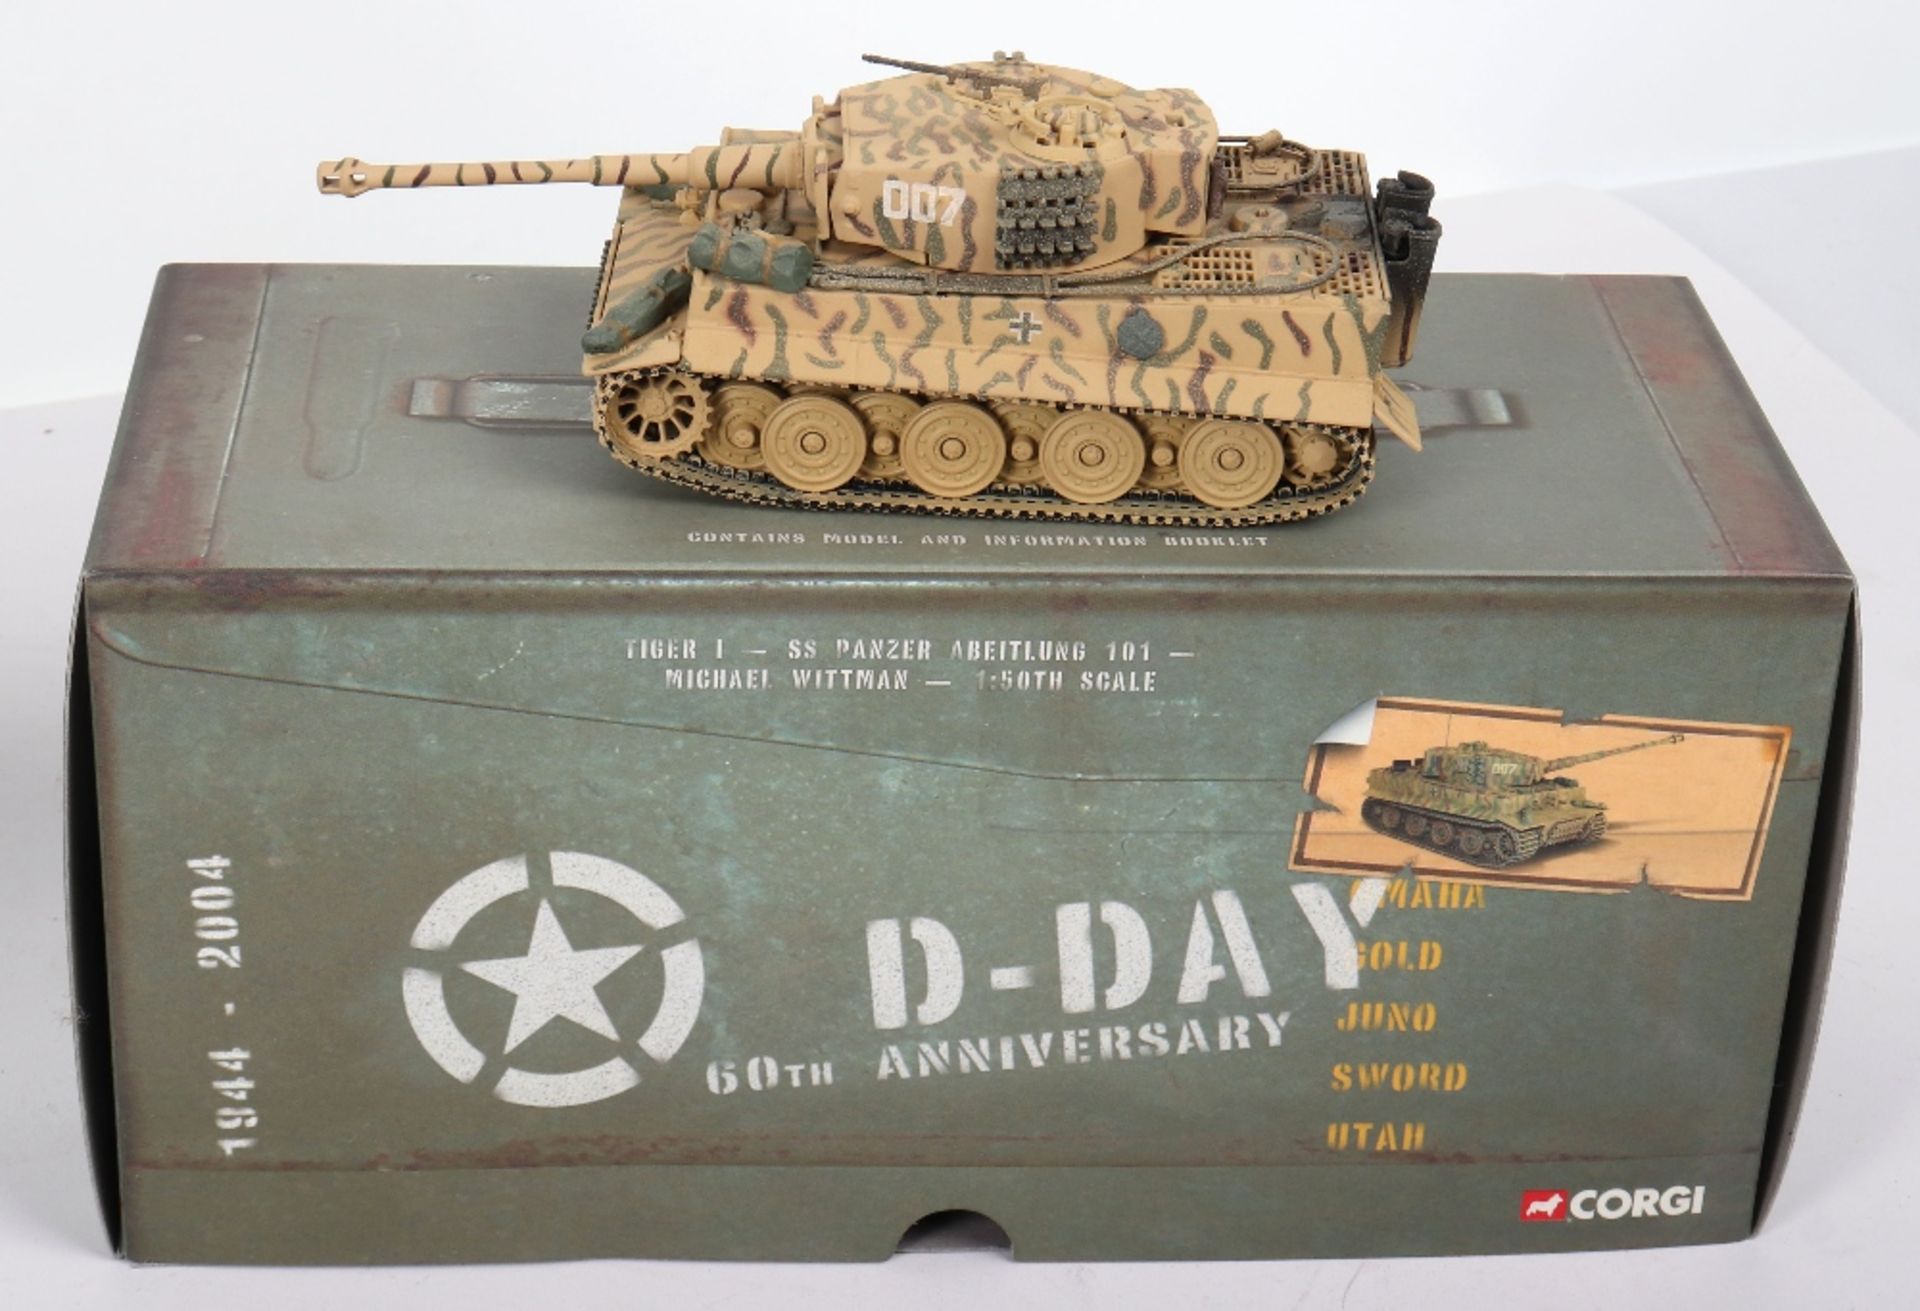 Two Boxed Corgi D-Day 50th Anniversary Models - Image 4 of 5